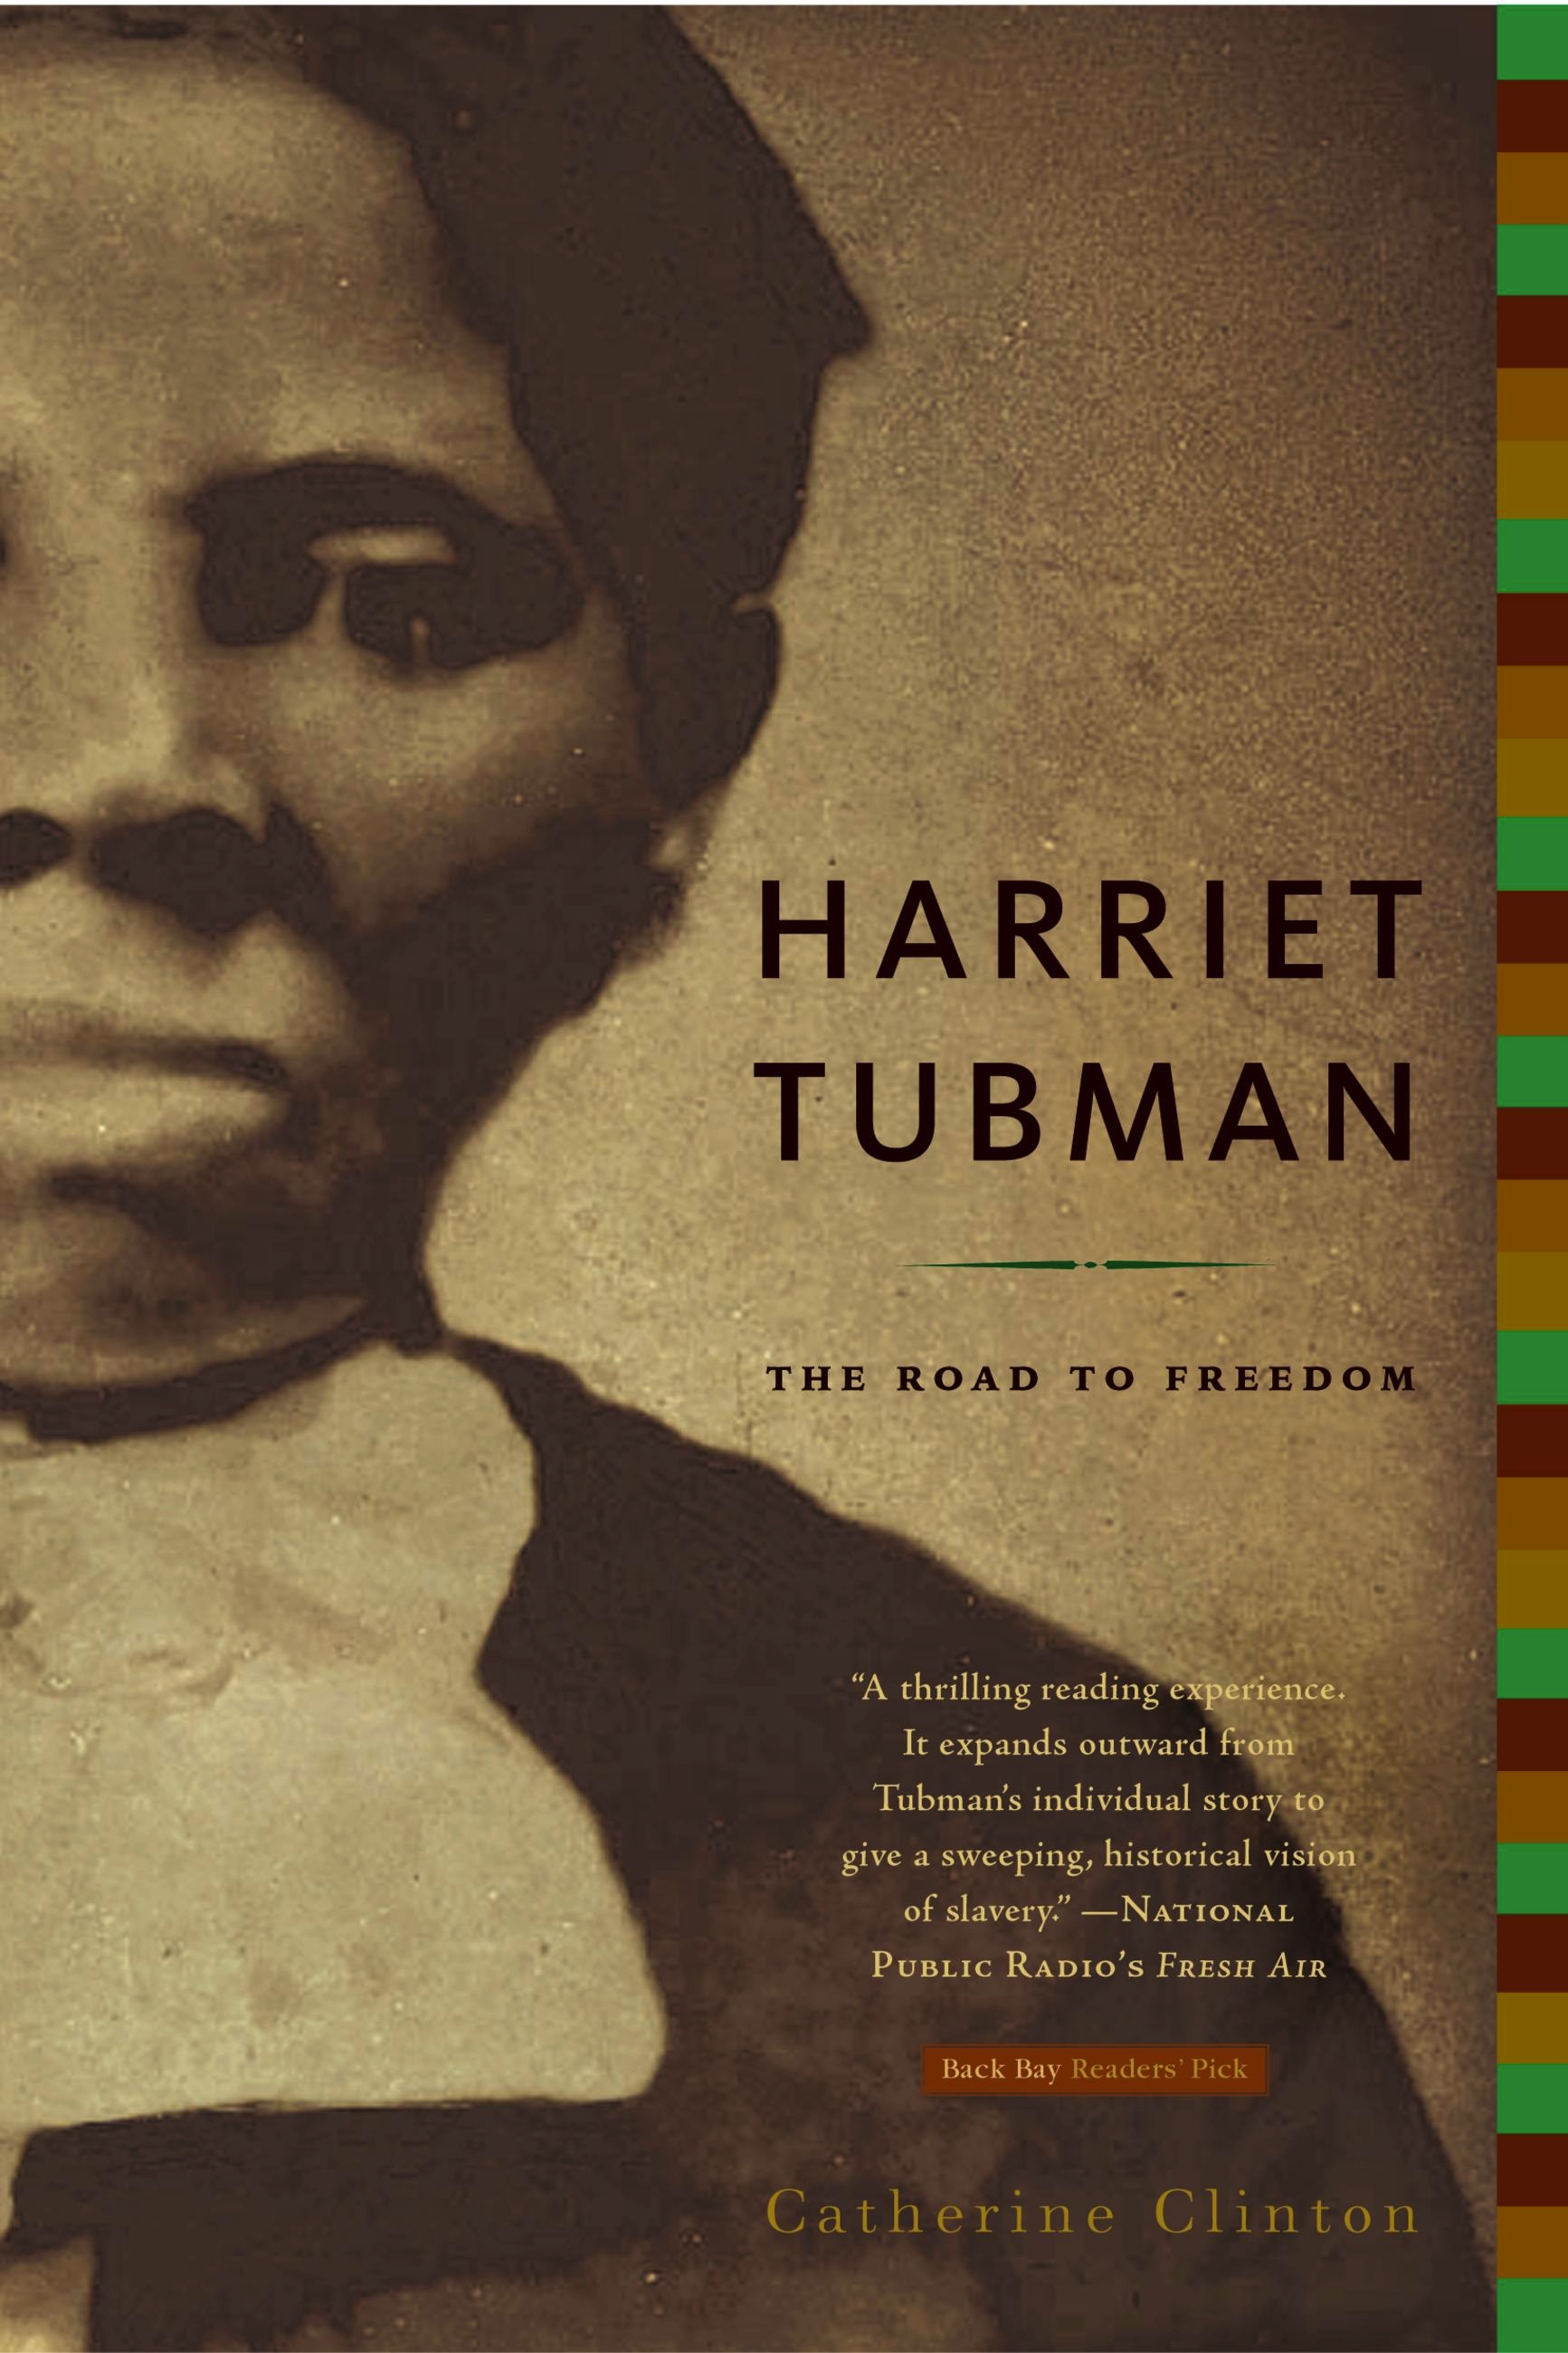 Four Questions Forharriet Tubman Biographer Catherine Clinton